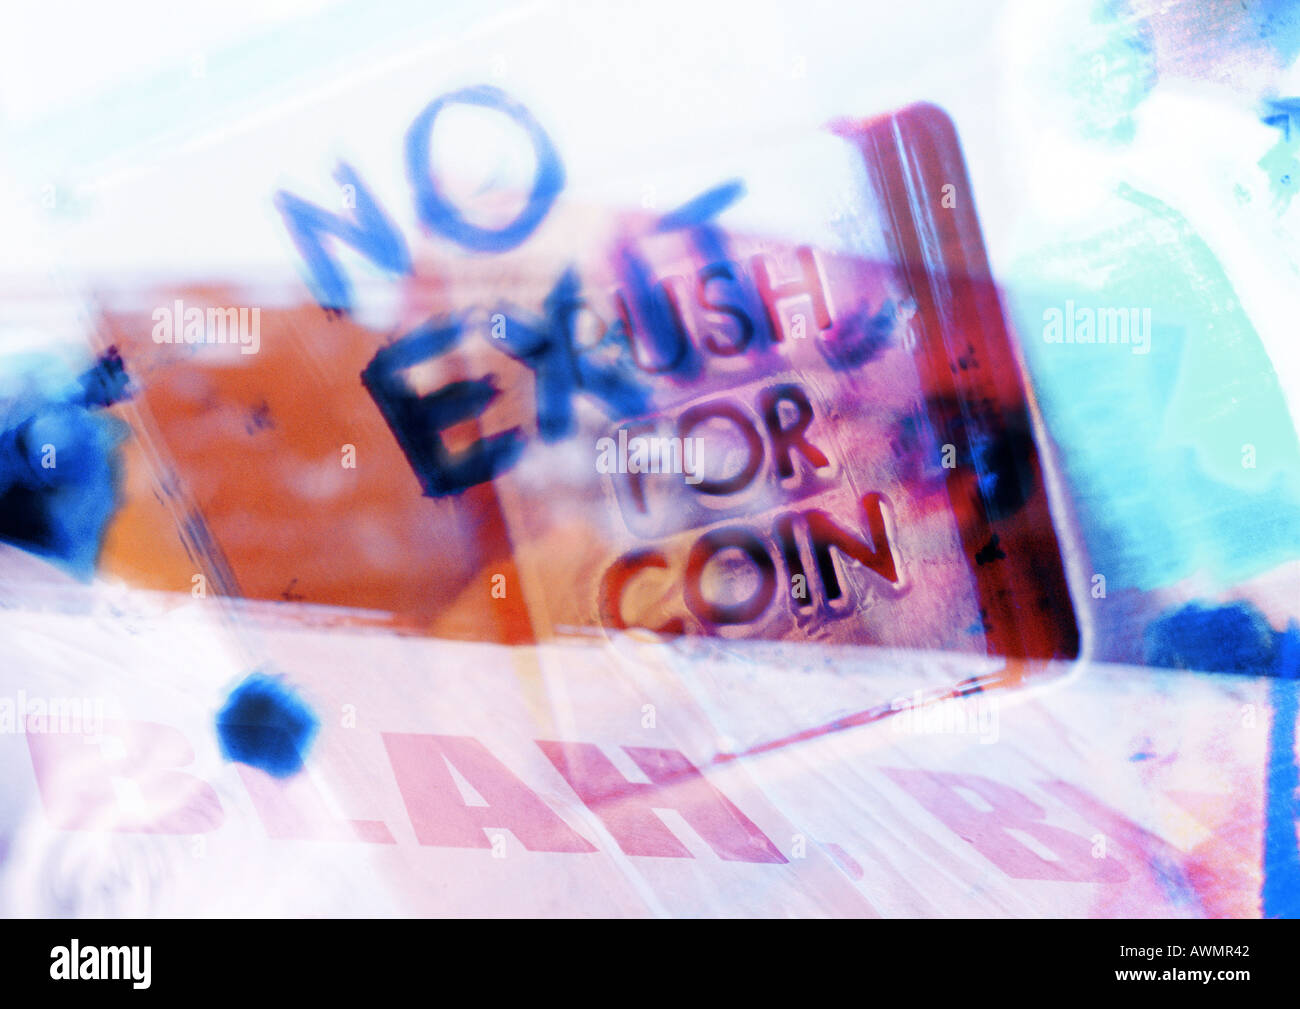 No exit, 'push for coin' and 'blah blah' texts, composite, close-up Stock Photo